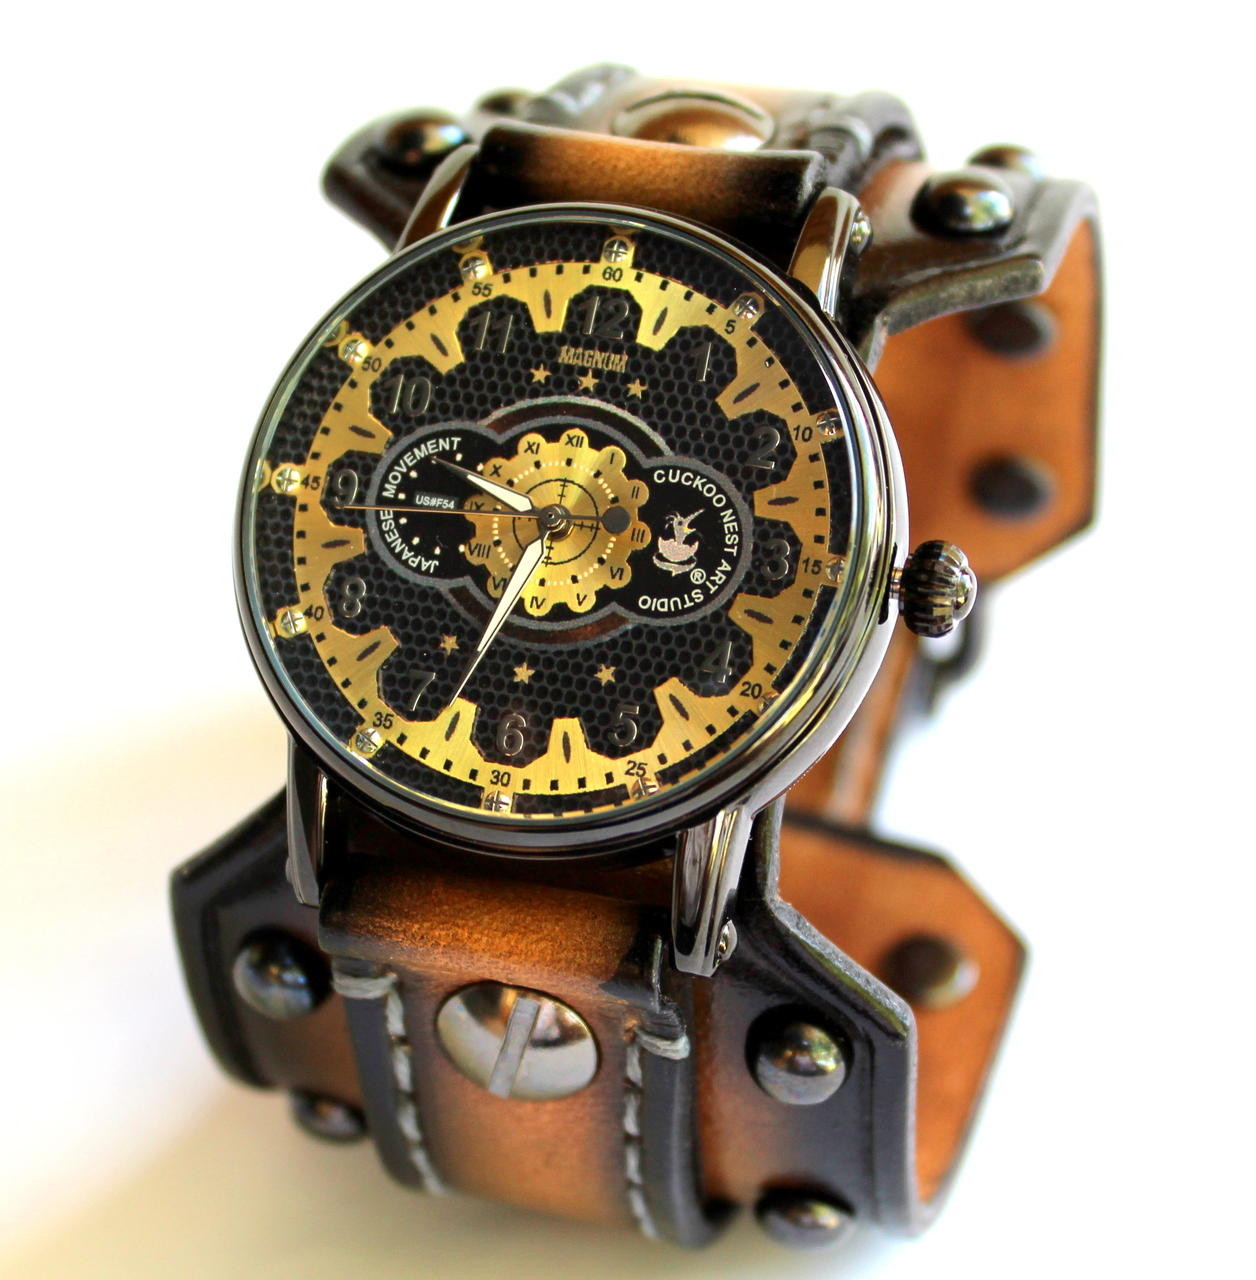 Personalizable leather cuff watch with Steampunk Watch